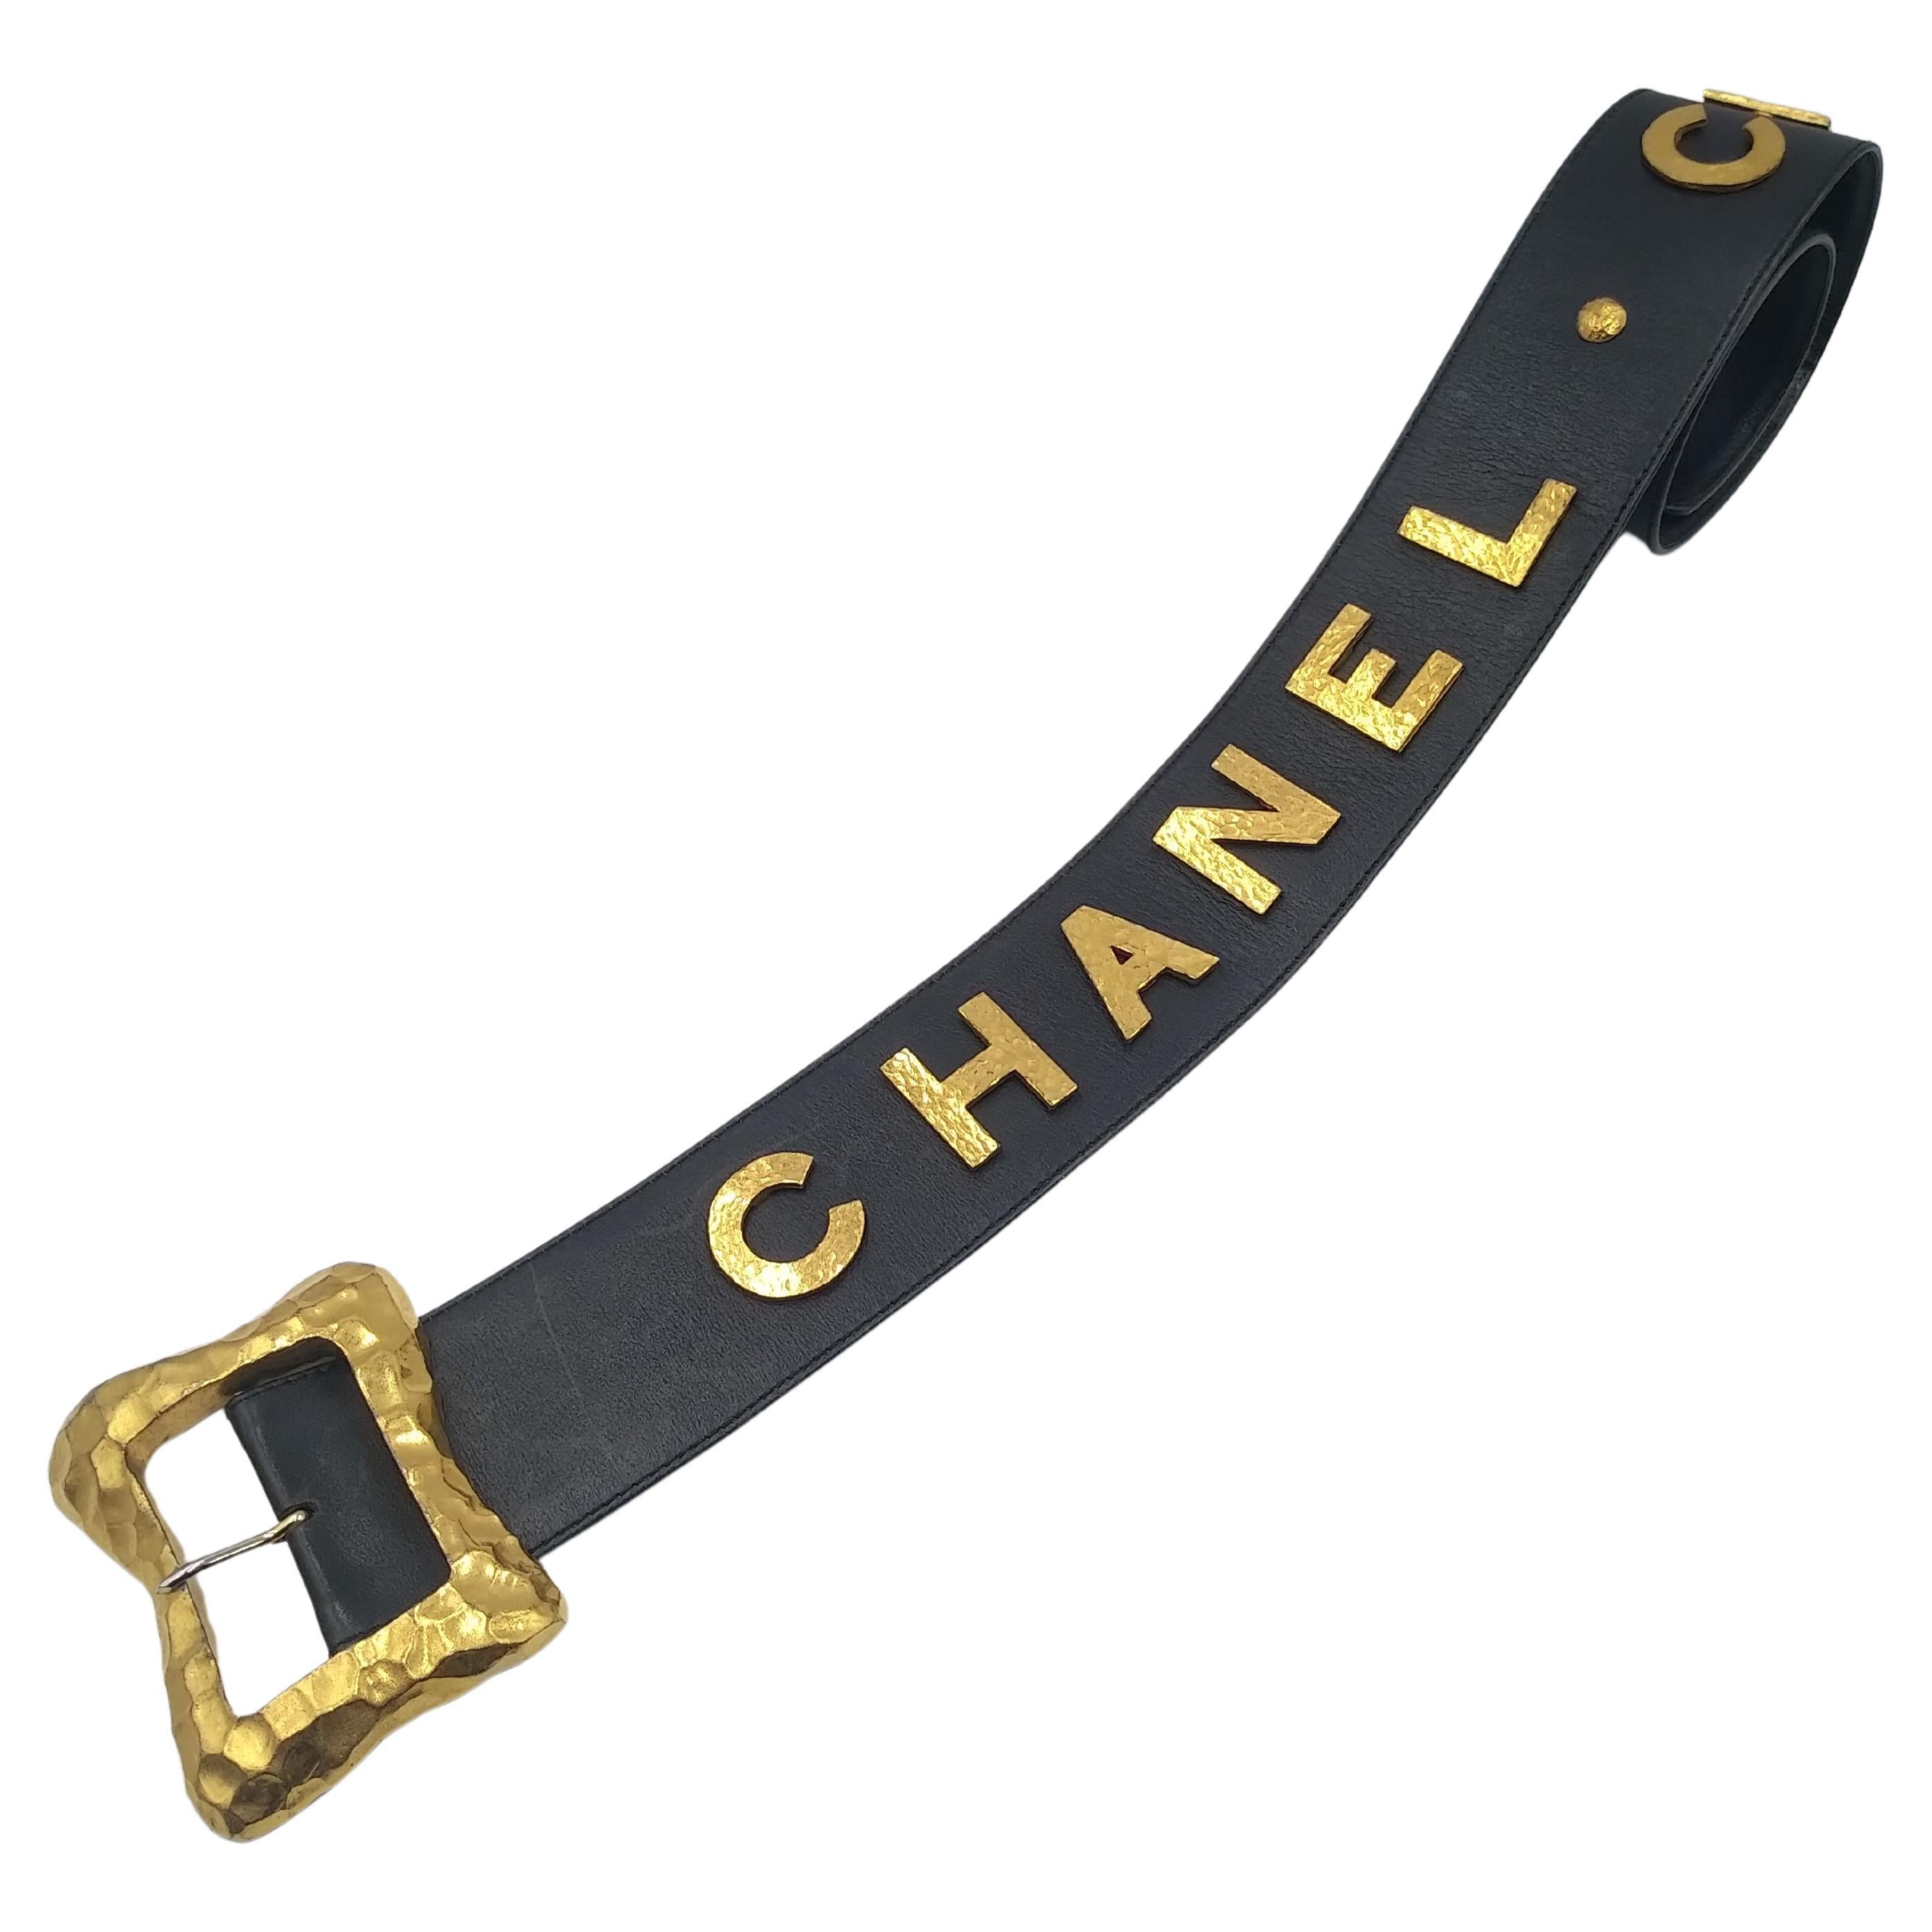 1990s Chanel black leather belt Gold Iconic written Chanel 